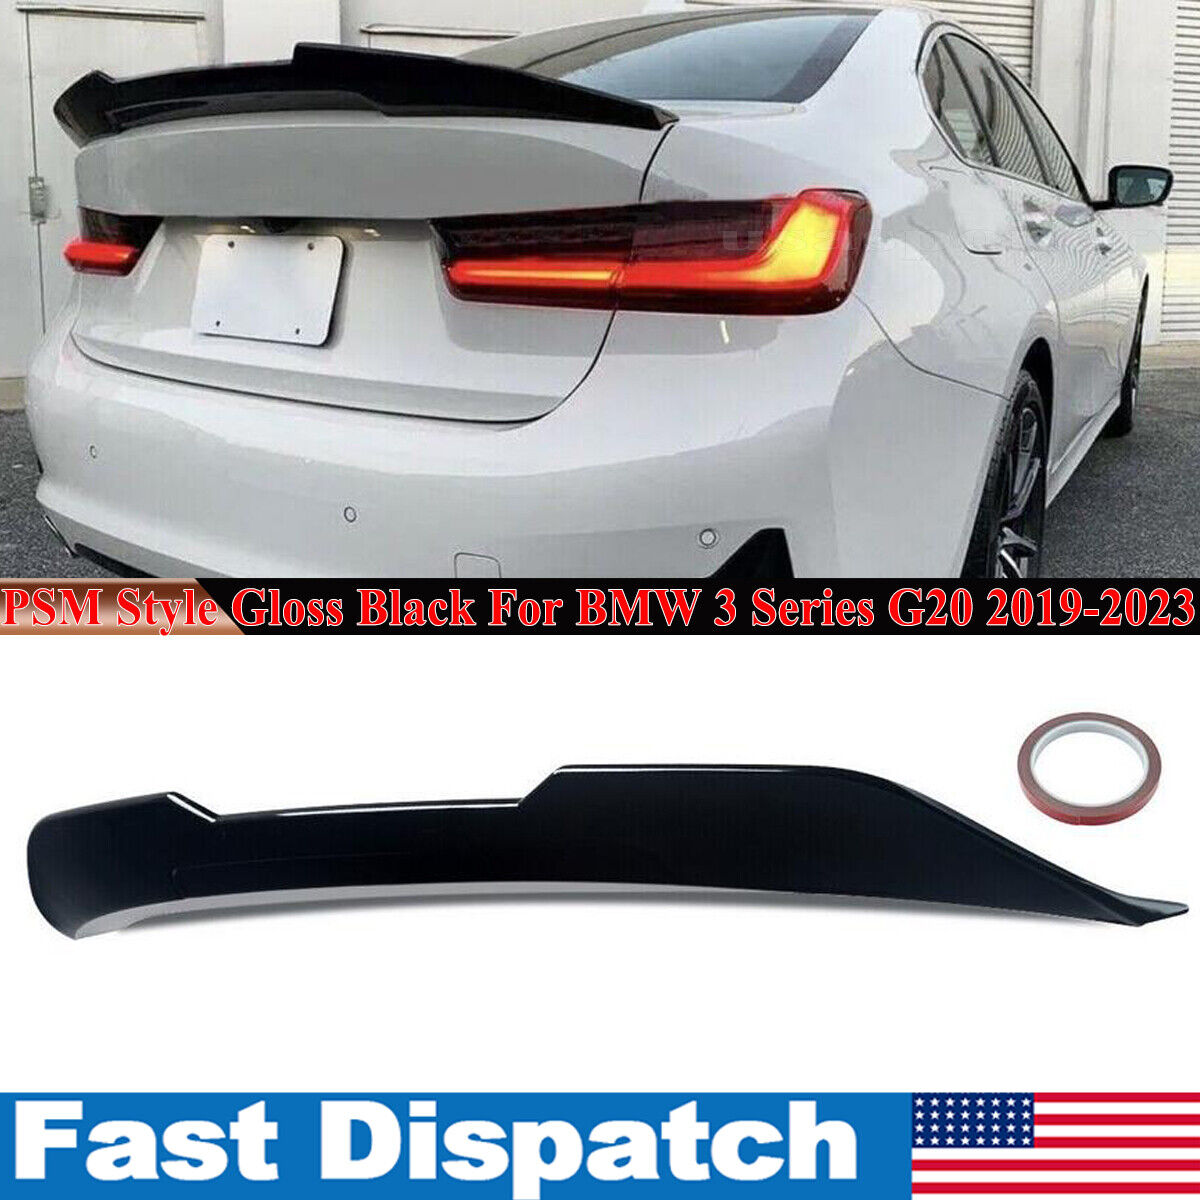 Gloss Black PSM Style Rear Trunk Spoiler Wing Lip  For BMW 3 Series G20 2019-23